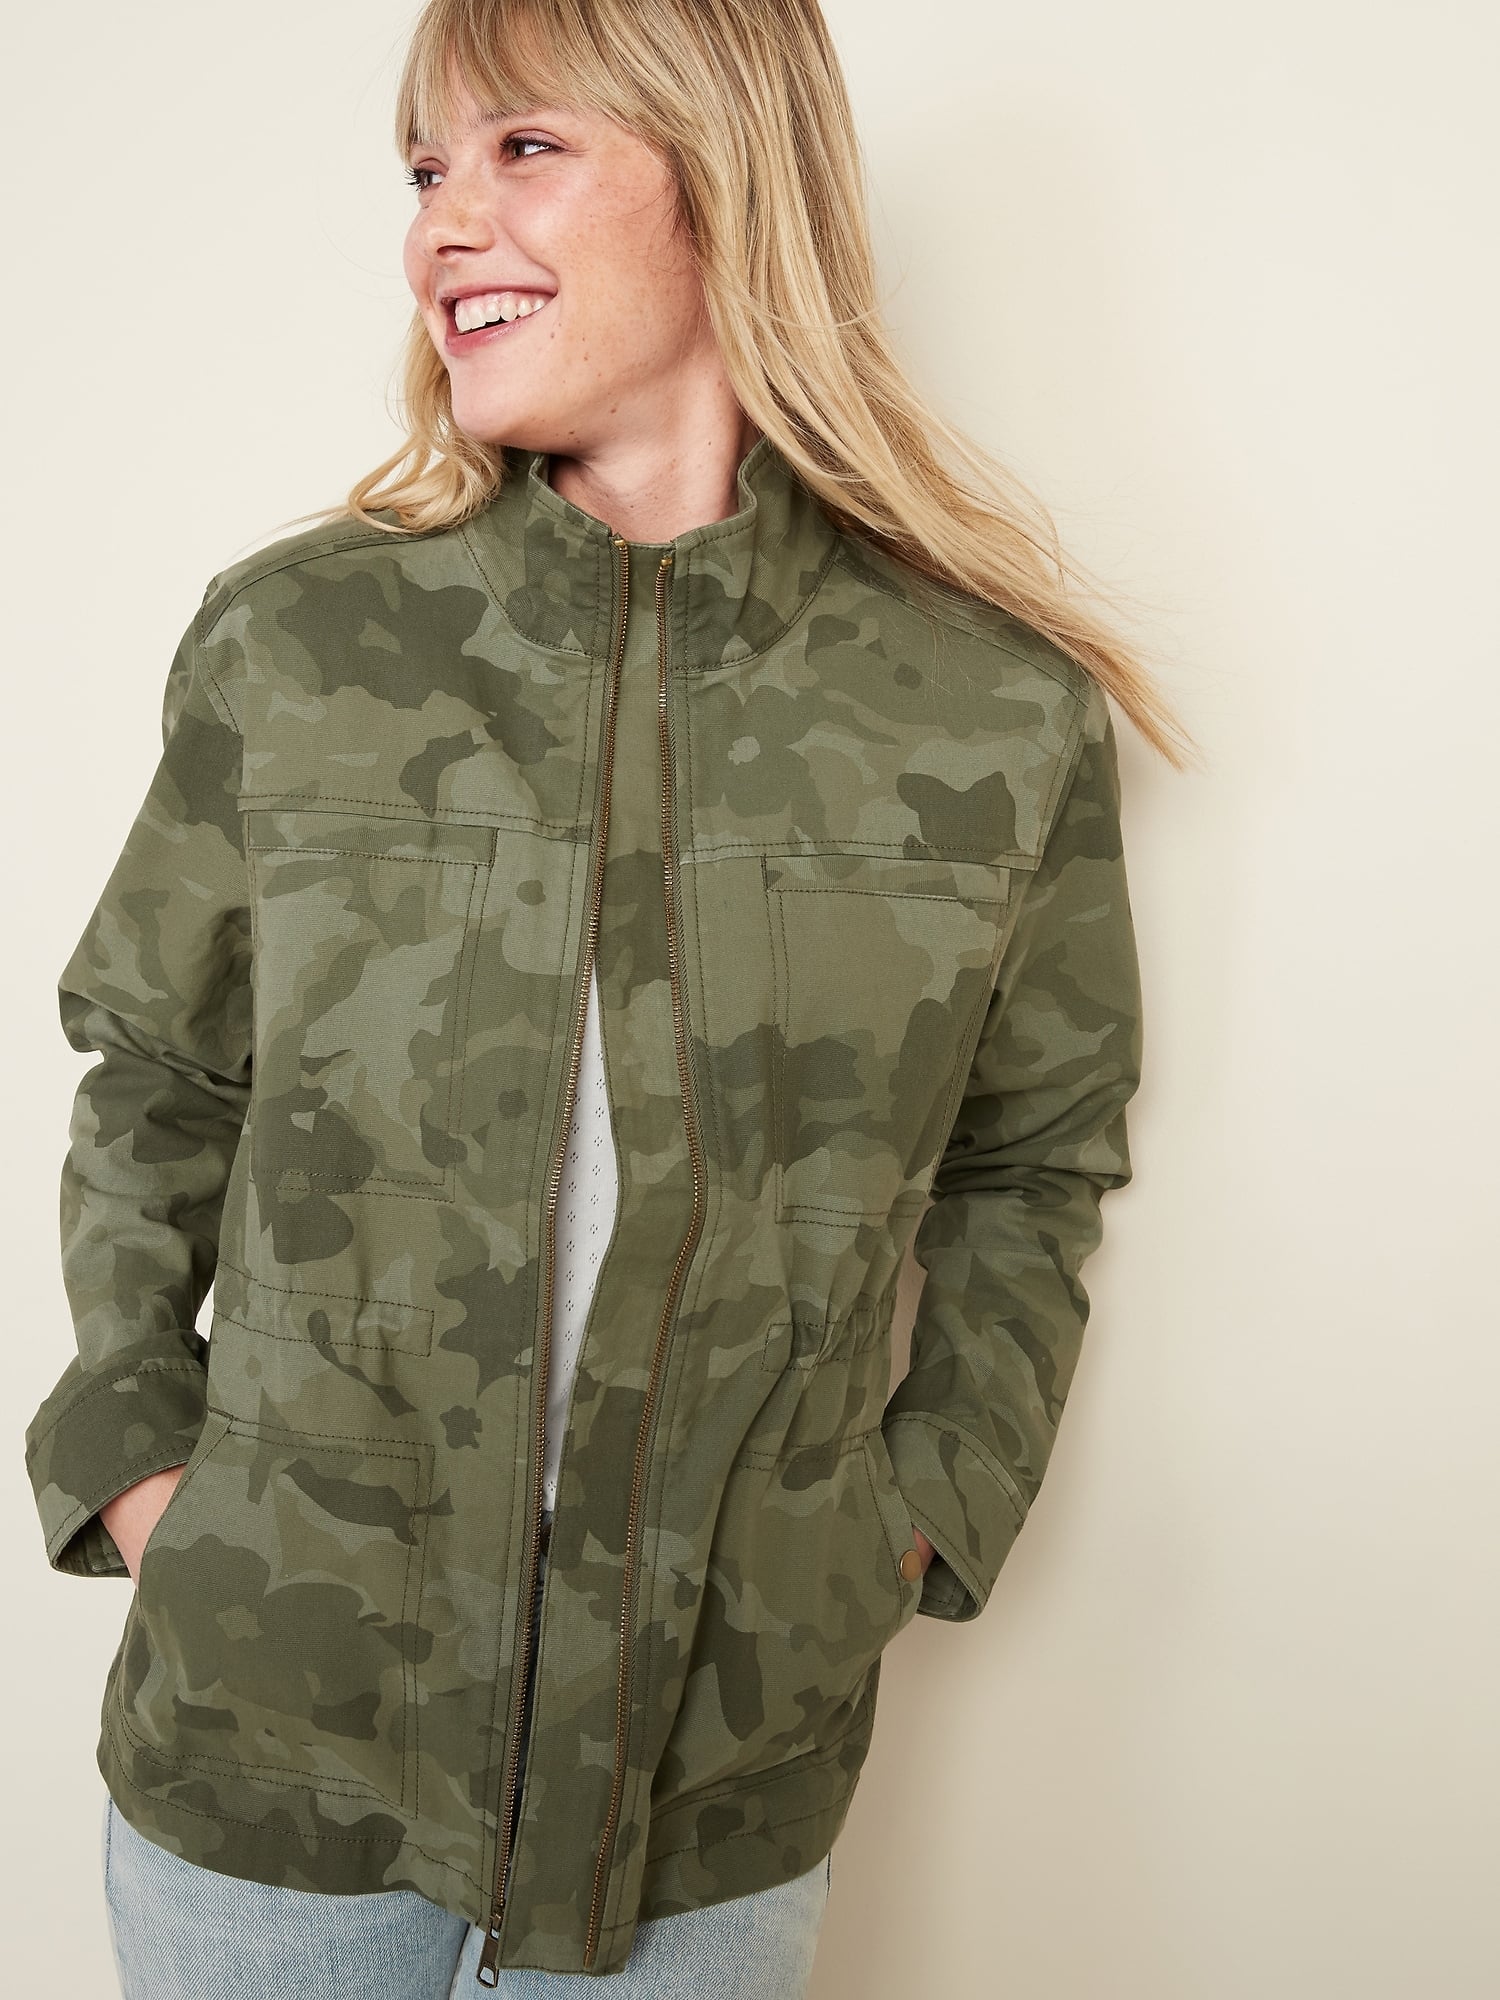 Stylish Camo Jacket For Women at Old Navy